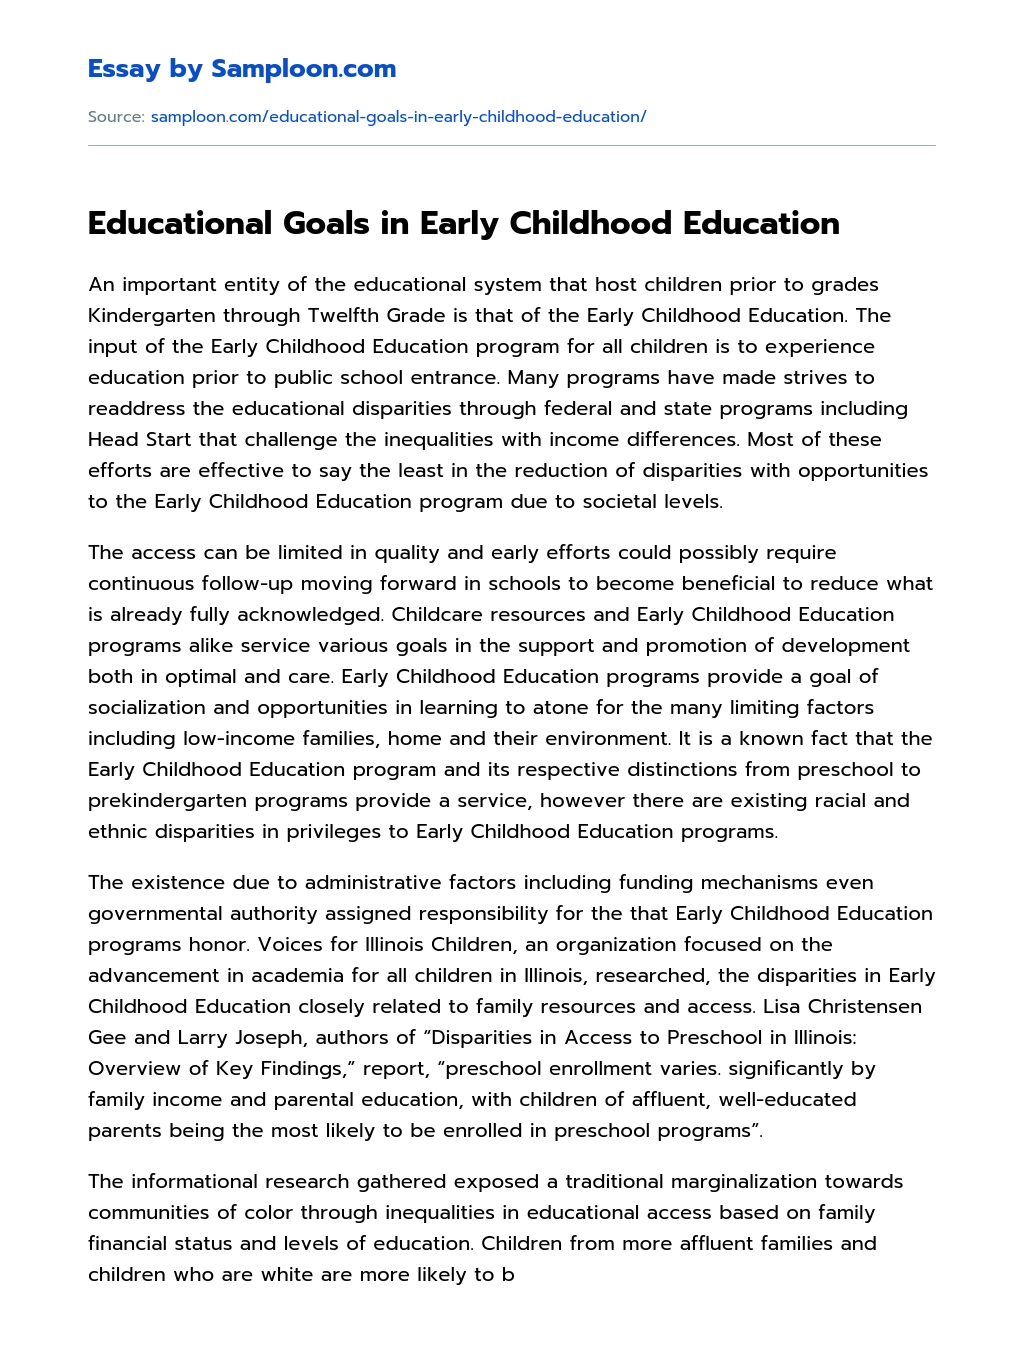 Educational Goals in Early Childhood Education essay